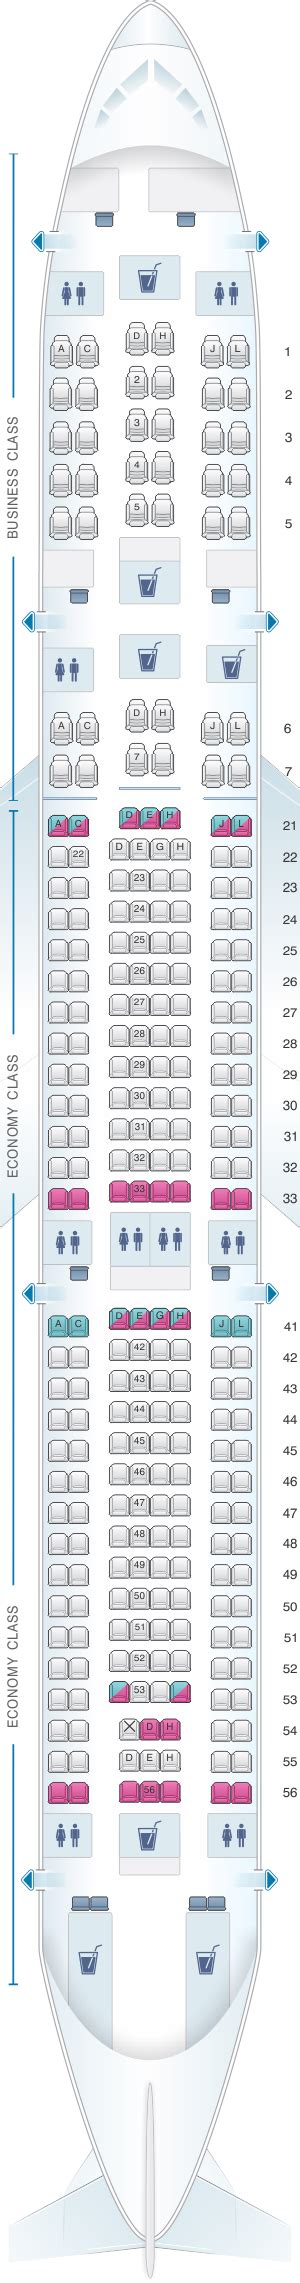 Learn About Imagen Airbus A Seat Map In Thptnganamst Edu Vn